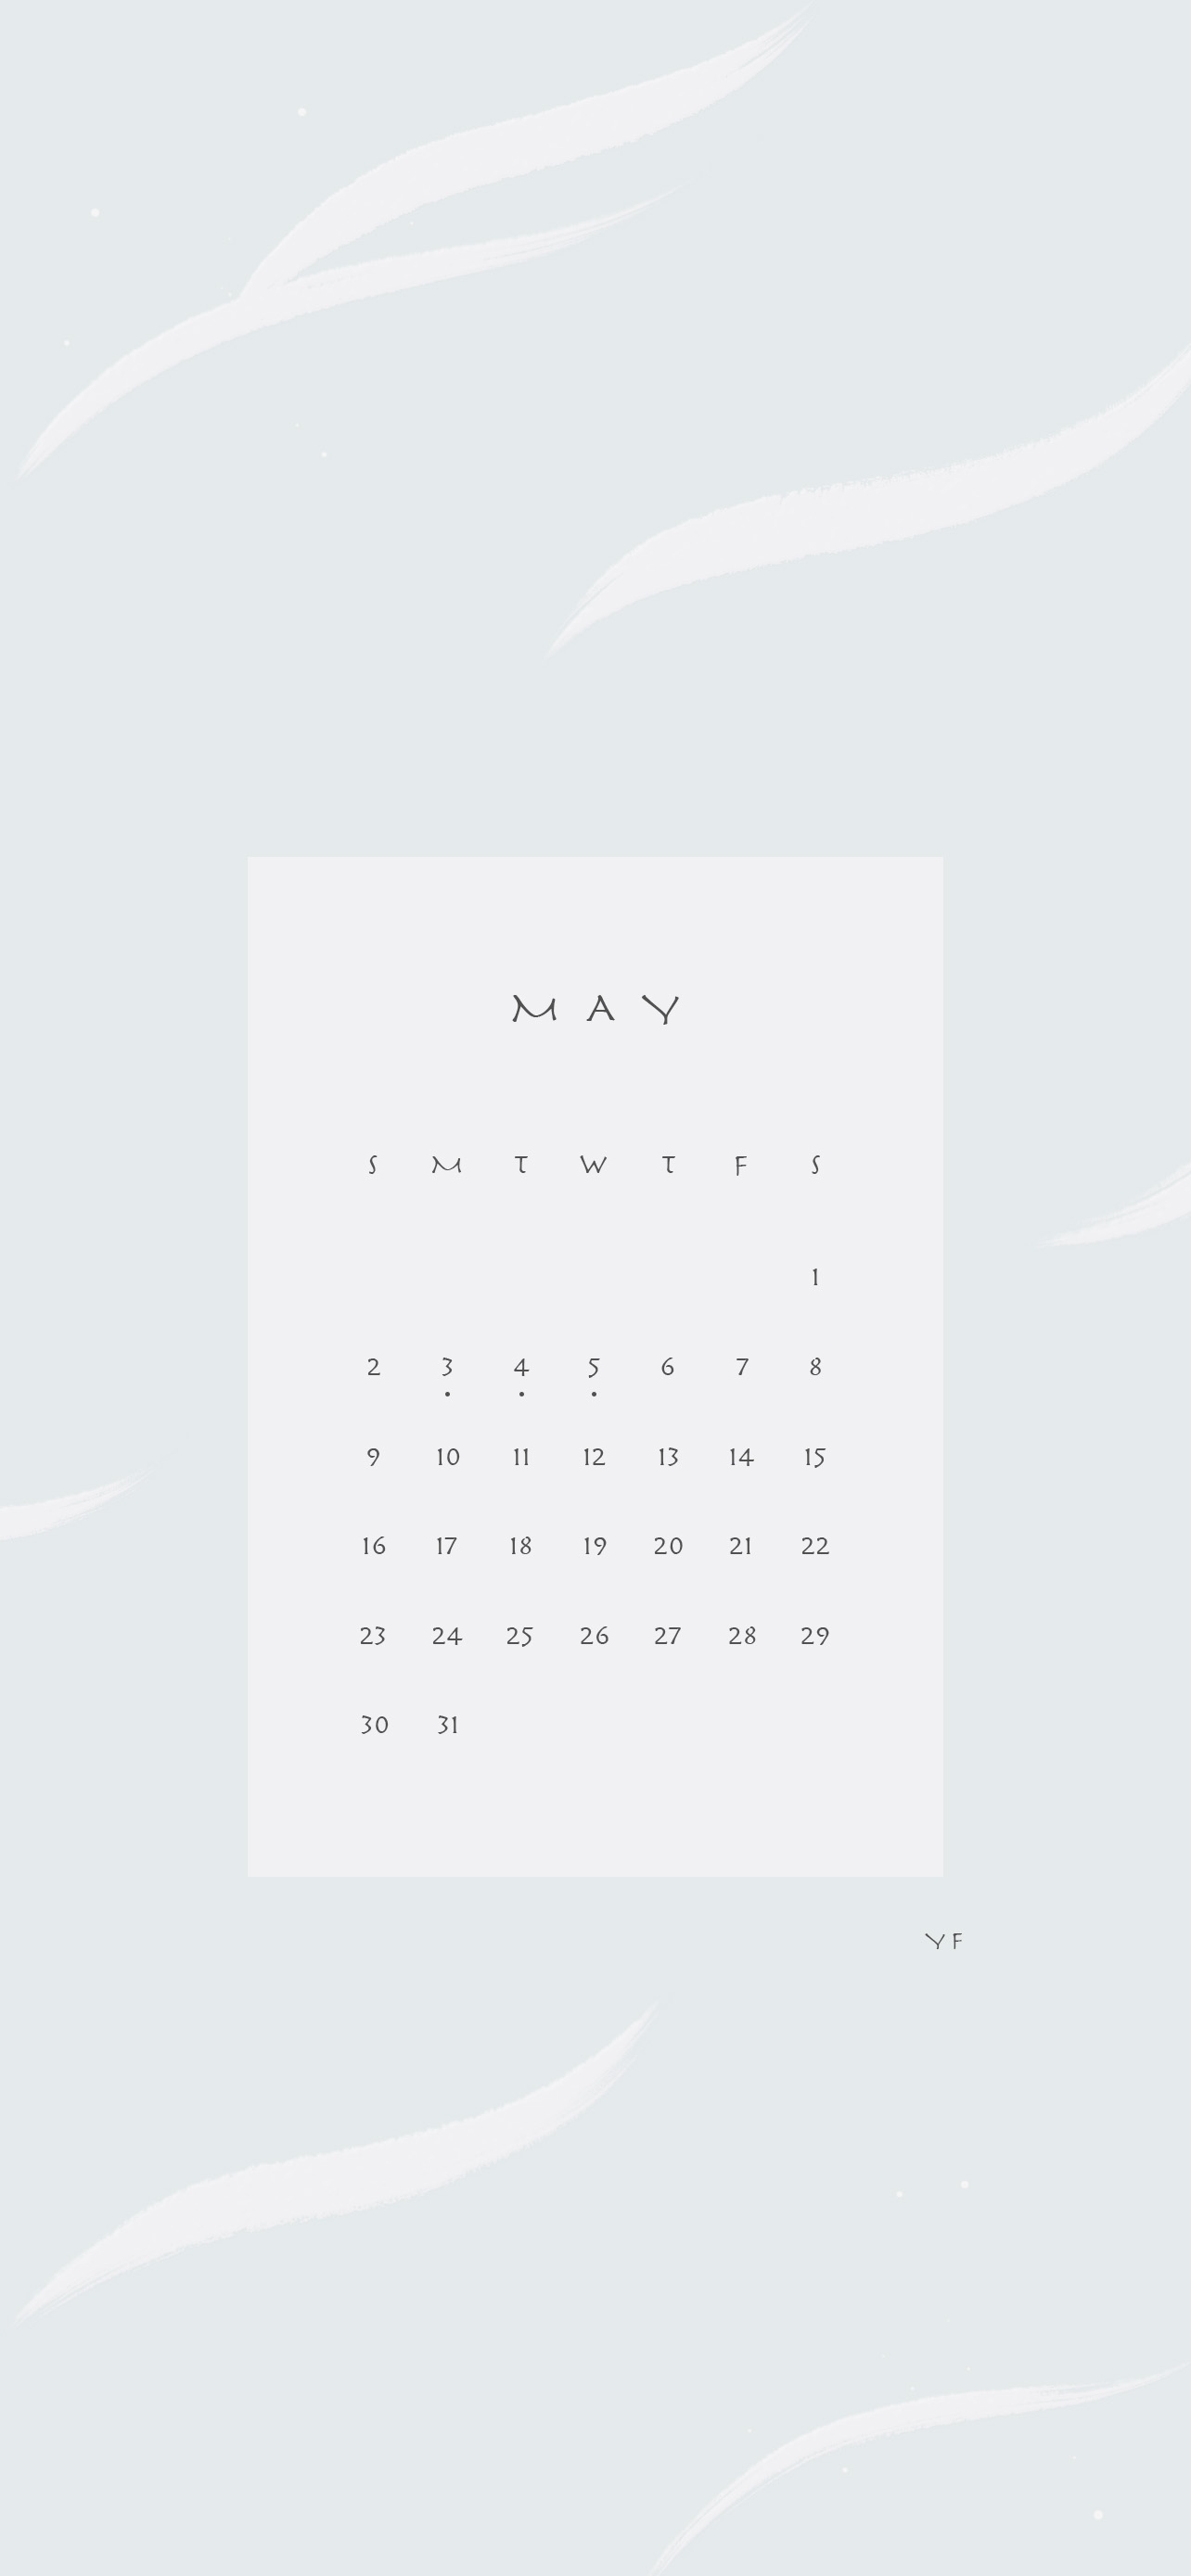 May 21 Calendar Wallpaper For The Iphone Design By Yf